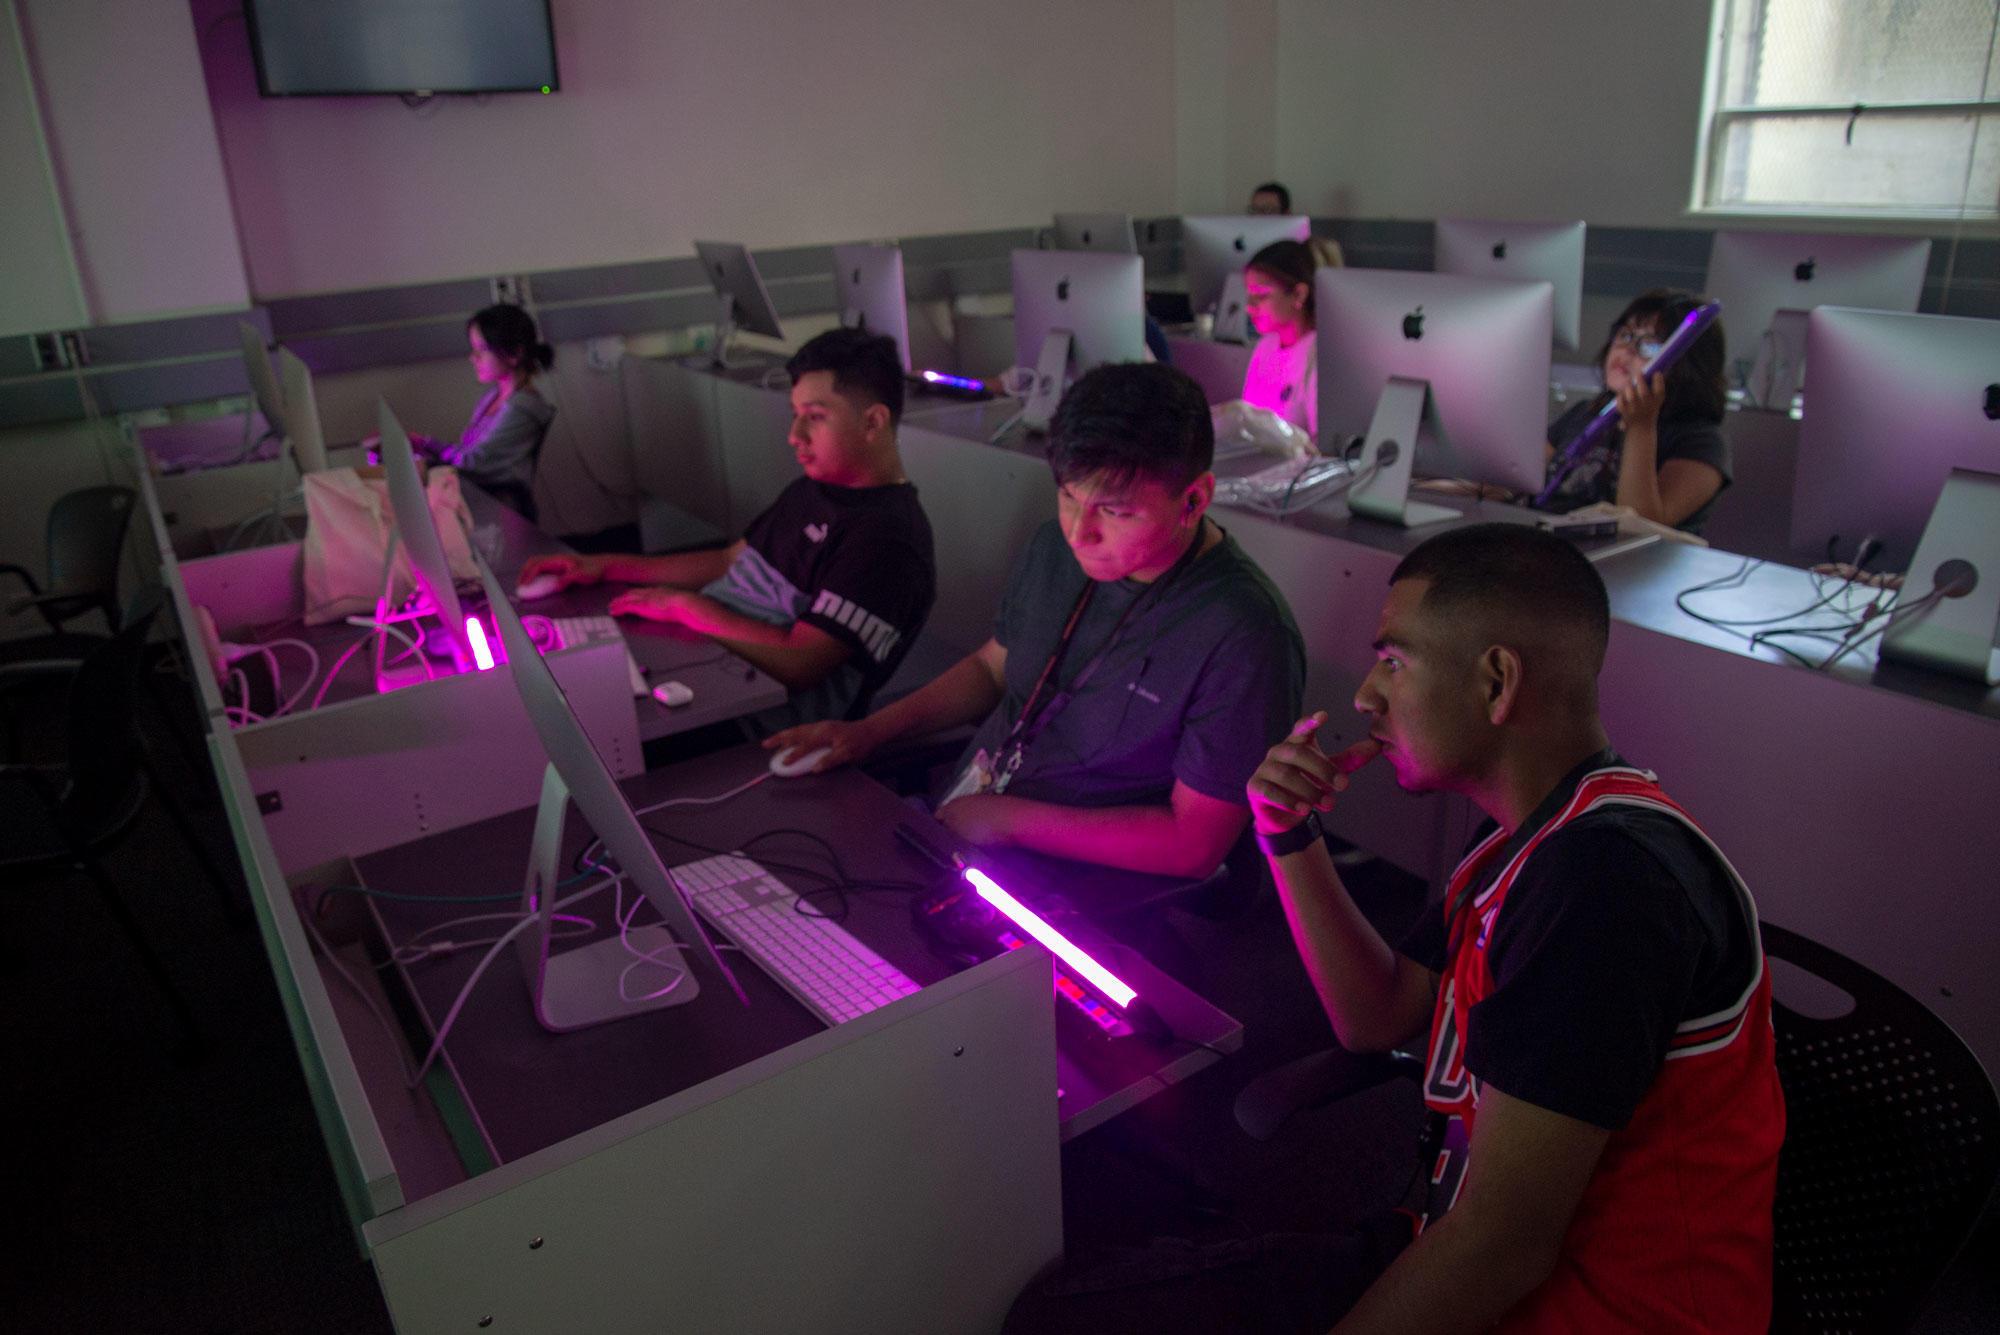 Teenagers are sitting in a computer lab for a workshop, using 3-D printed guitars that glow like light sabers.